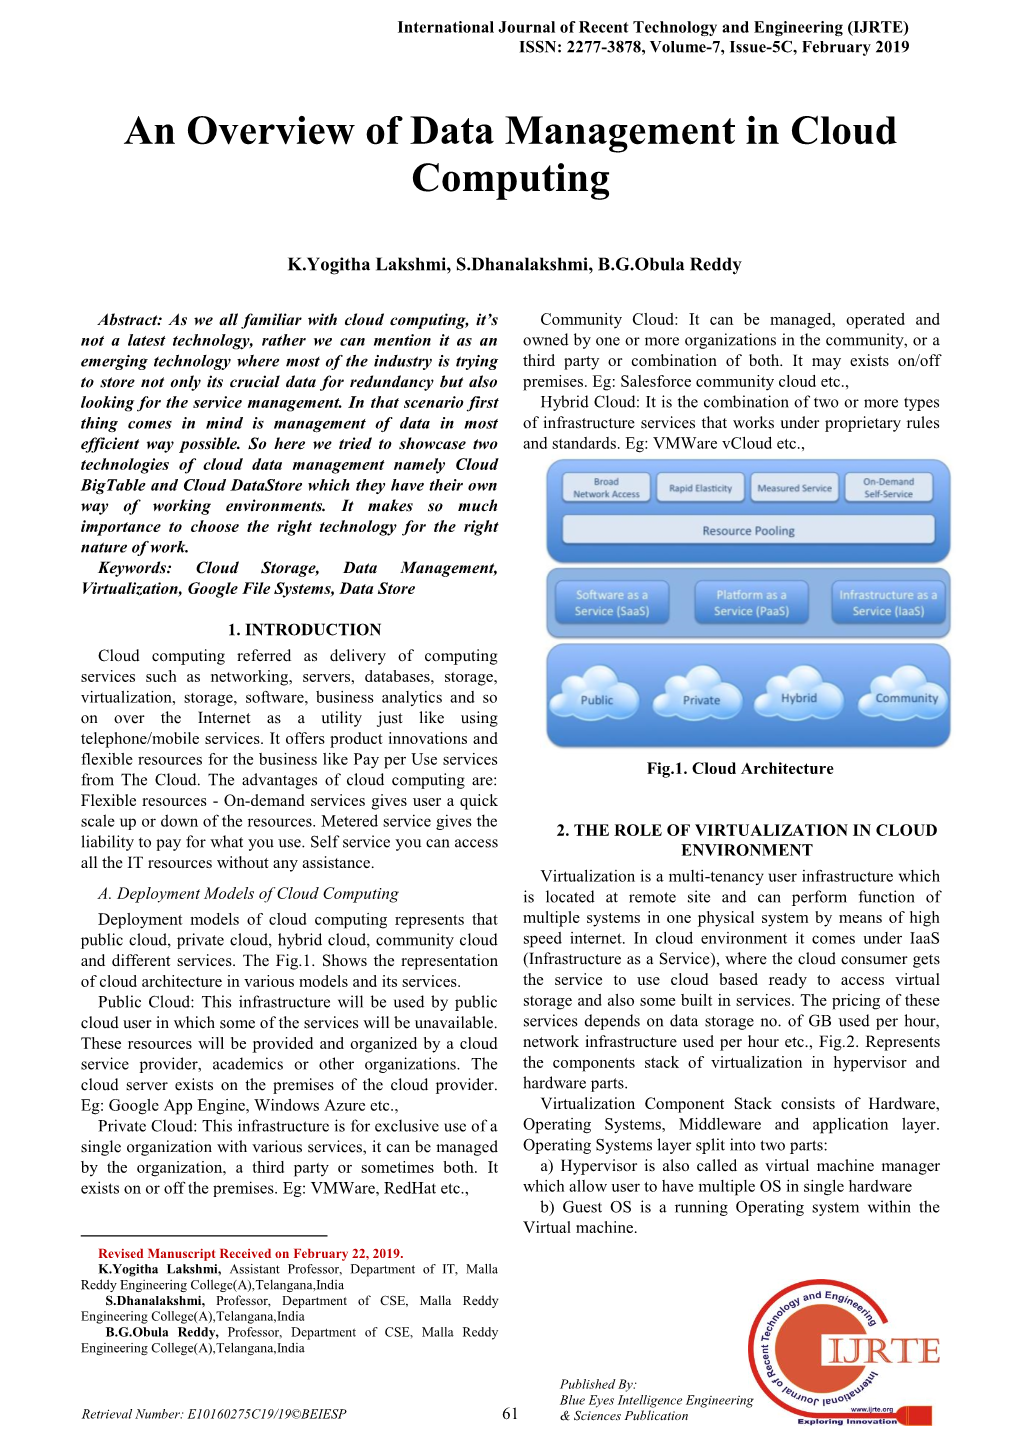 An Overview of Data Management in Cloud Computing